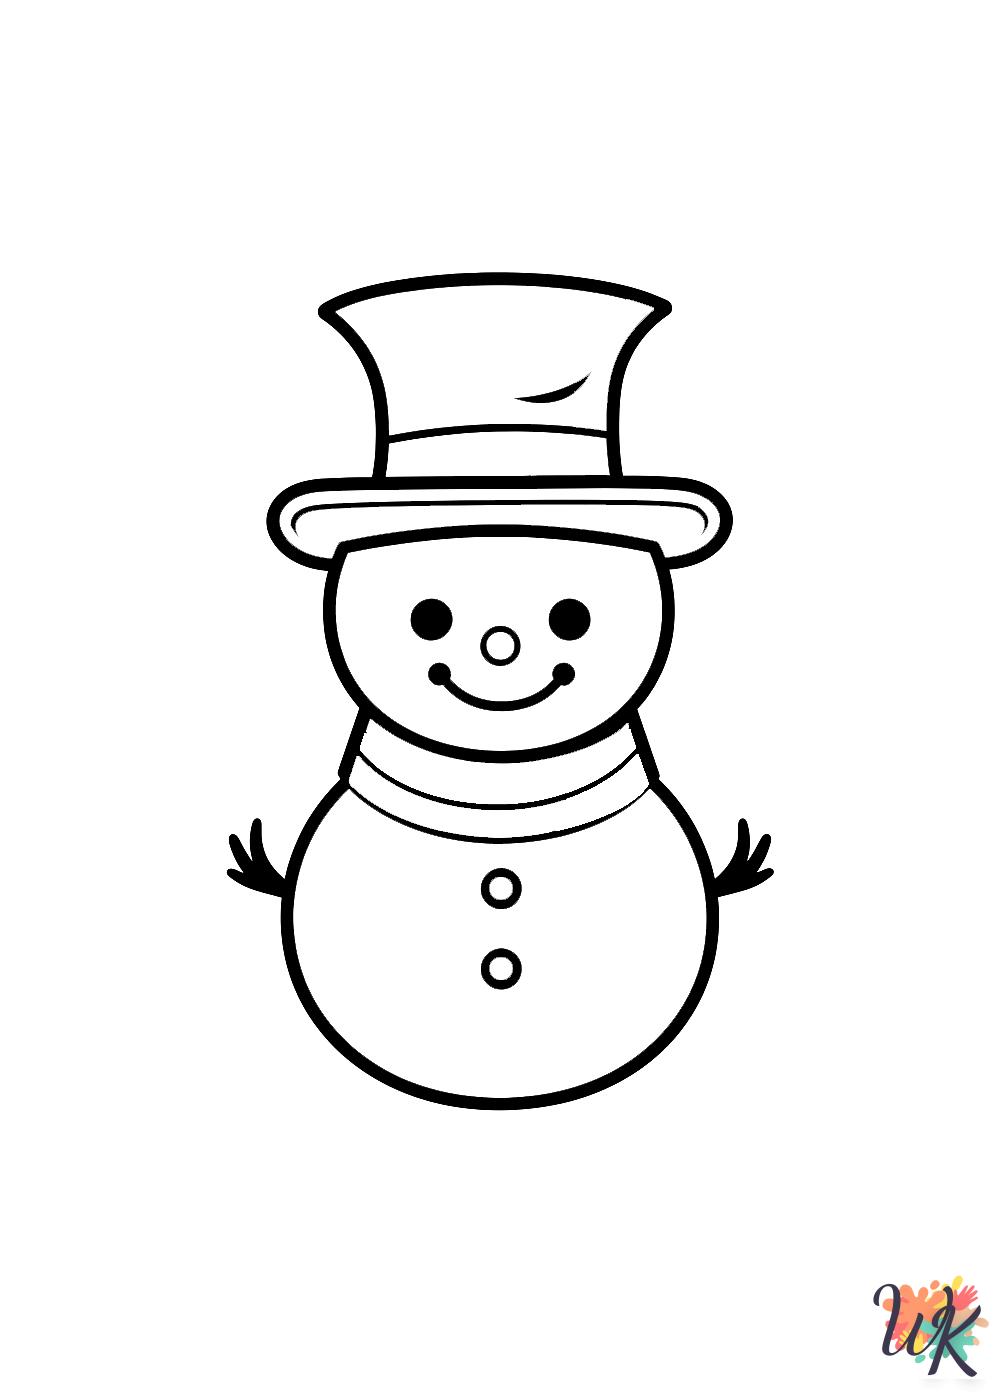 Snowman coloring book pages